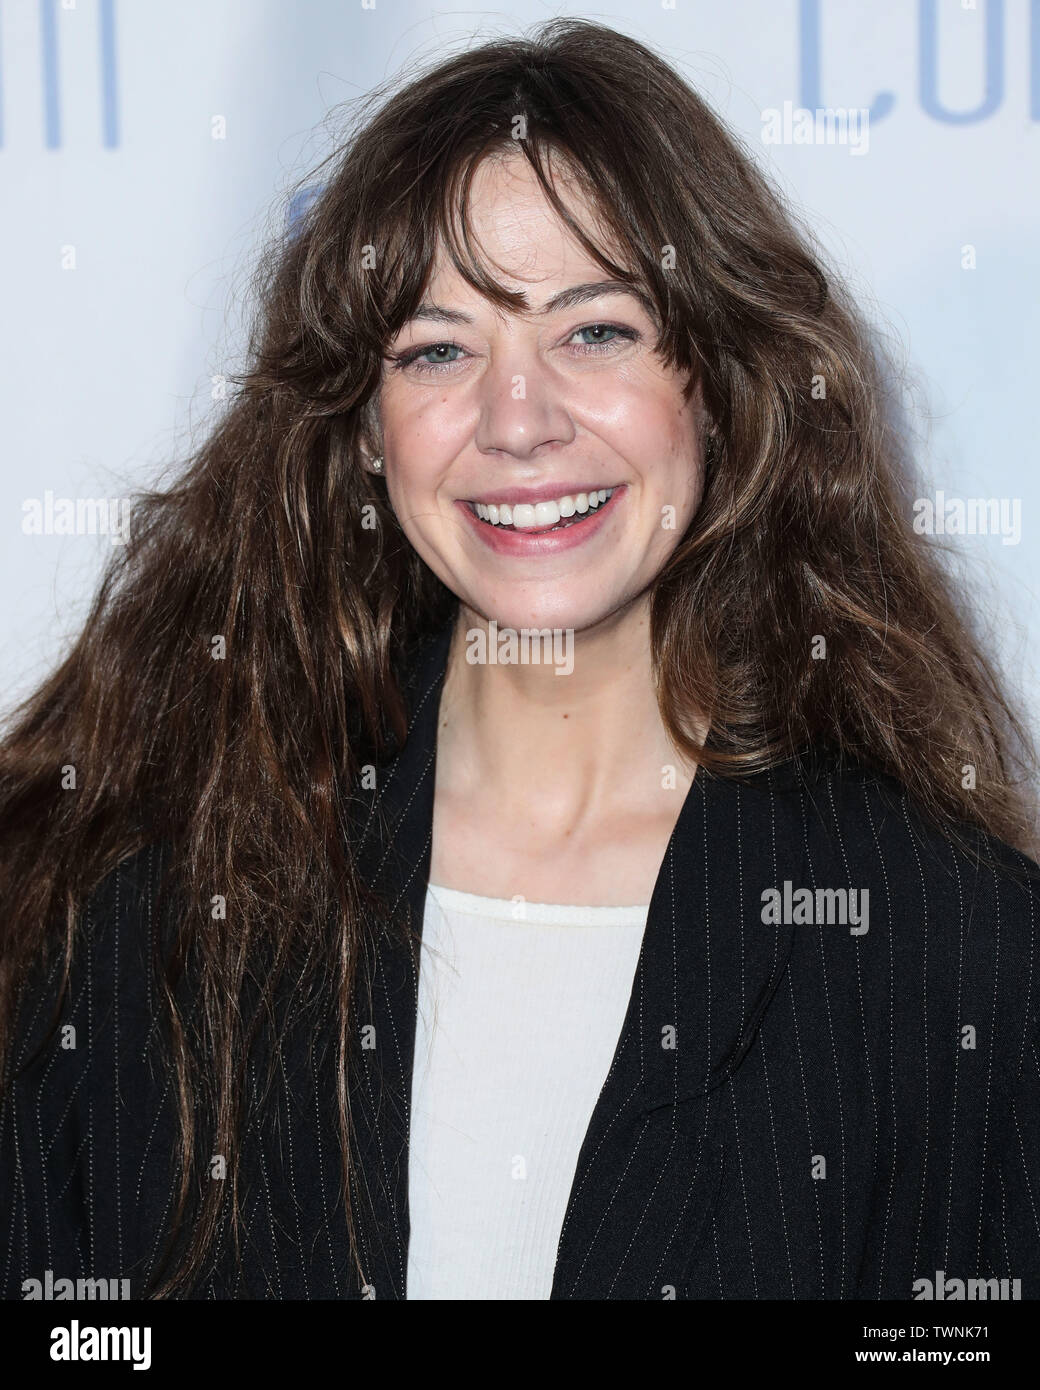 Los Angeles, United States. 21st June, 2019. LOS ANGELES, CALIFORNIA, USA - JUNE 21: Actress Analeigh Tipton arrives at the 2019 Rom Com Fest Los Angeles - 'Summer Night' held at Downtown Independent on June 21, 2019 in Los Angeles, California, United States. (Photo by Xavier Collin/Image Press Agency) Credit: Image Press Agency/Alamy Live News Stock Photo